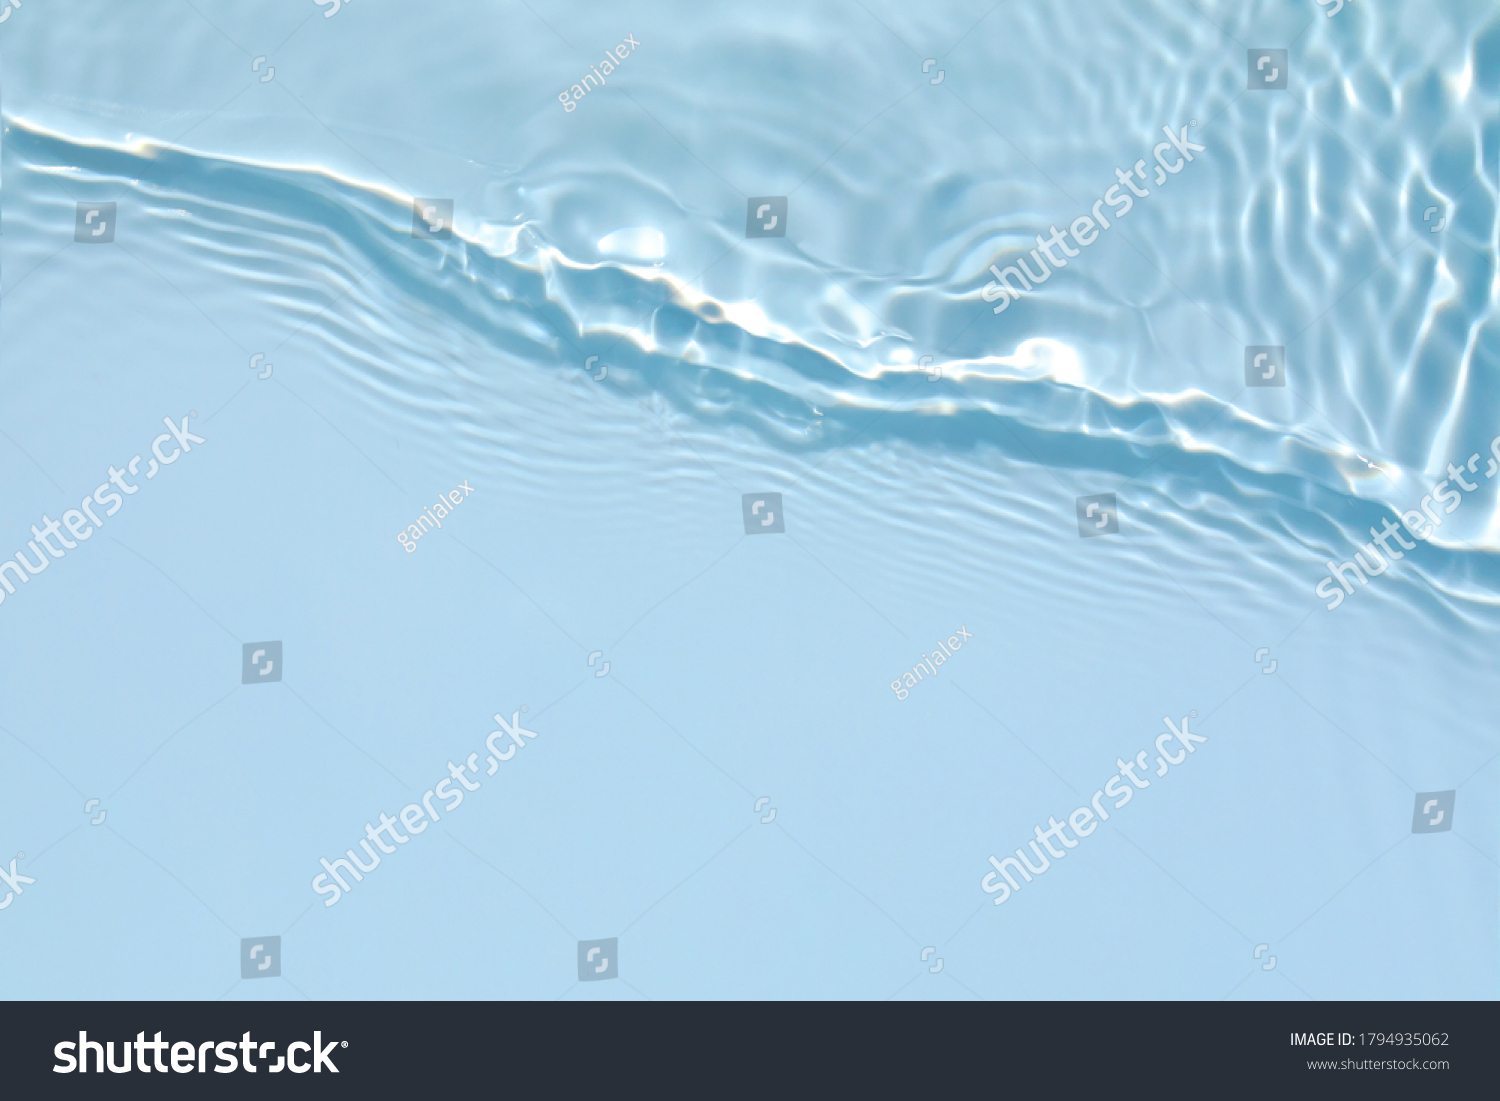 Blurred transparent blue colored clear calm water surface texture with splashes and bubbles. Trendy abstract nature background. Water waves in sunlight with copy space. #1794935062